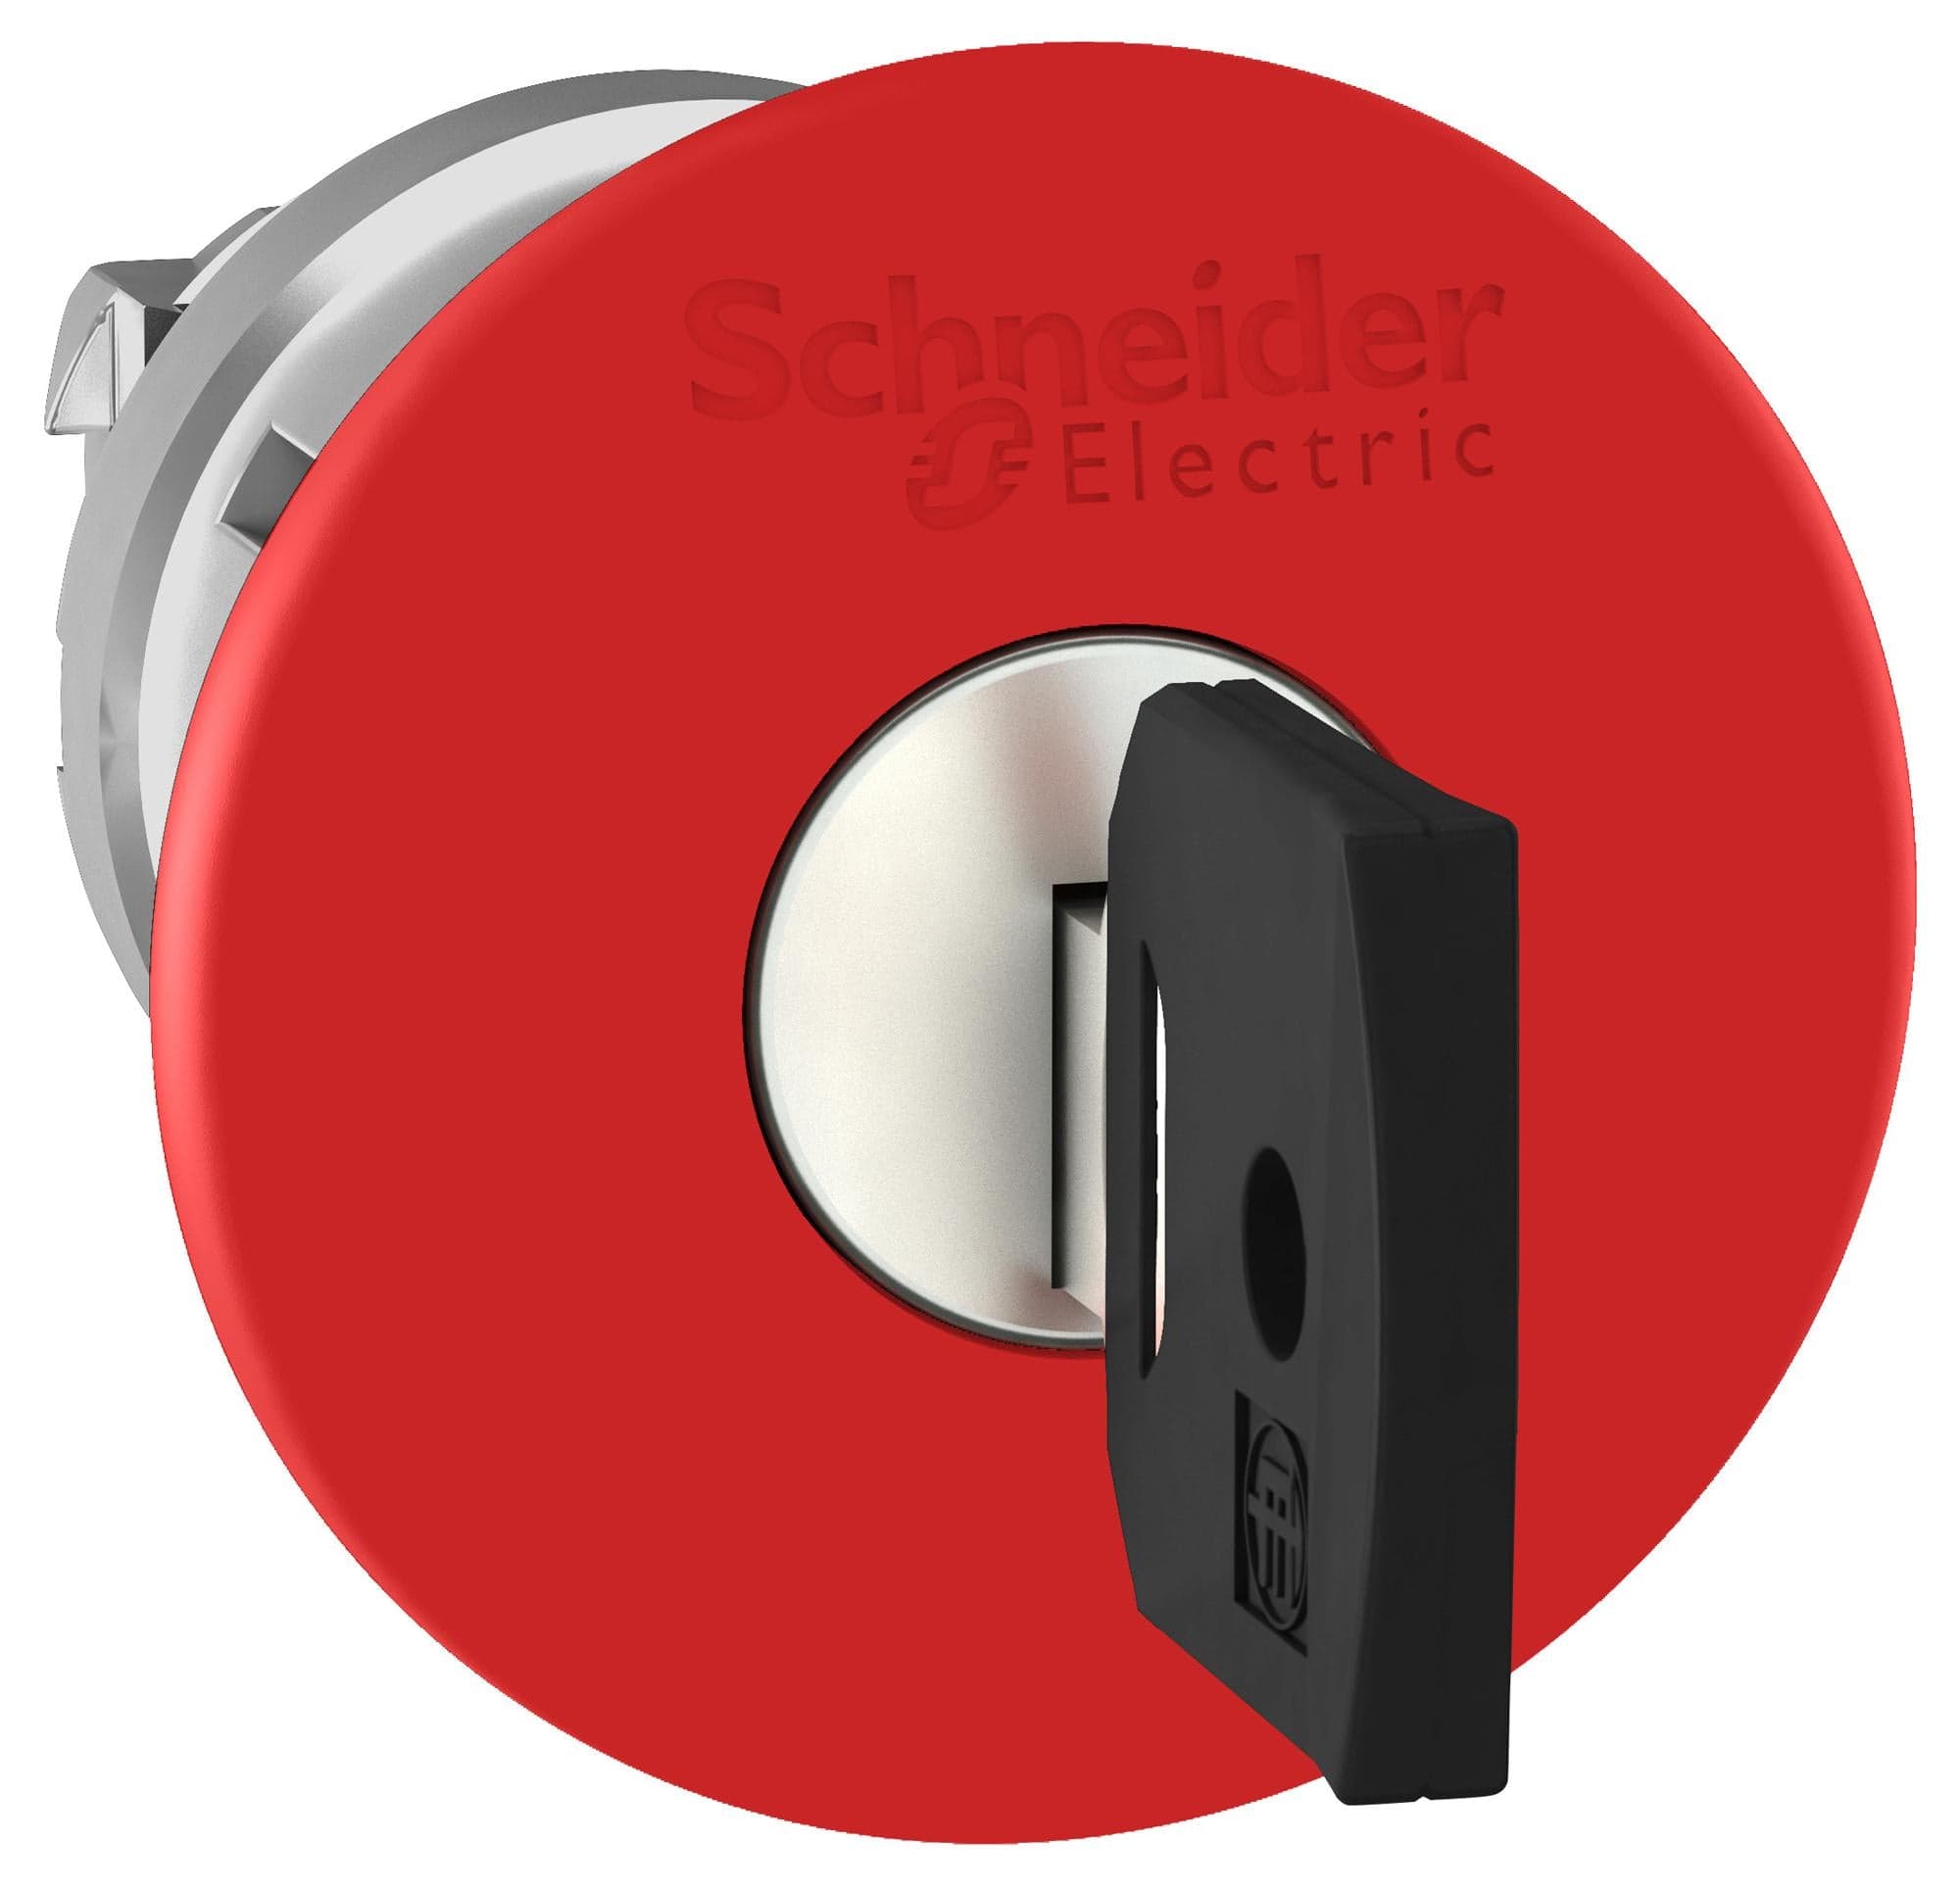 SCHNEIDER ELECTRIC Actuators ZB4BS94420 SWITCH ACTUATOR, RED, KEY RELEASE E-STOP SCHNEIDER ELECTRIC 3109518 ZB4BS94420